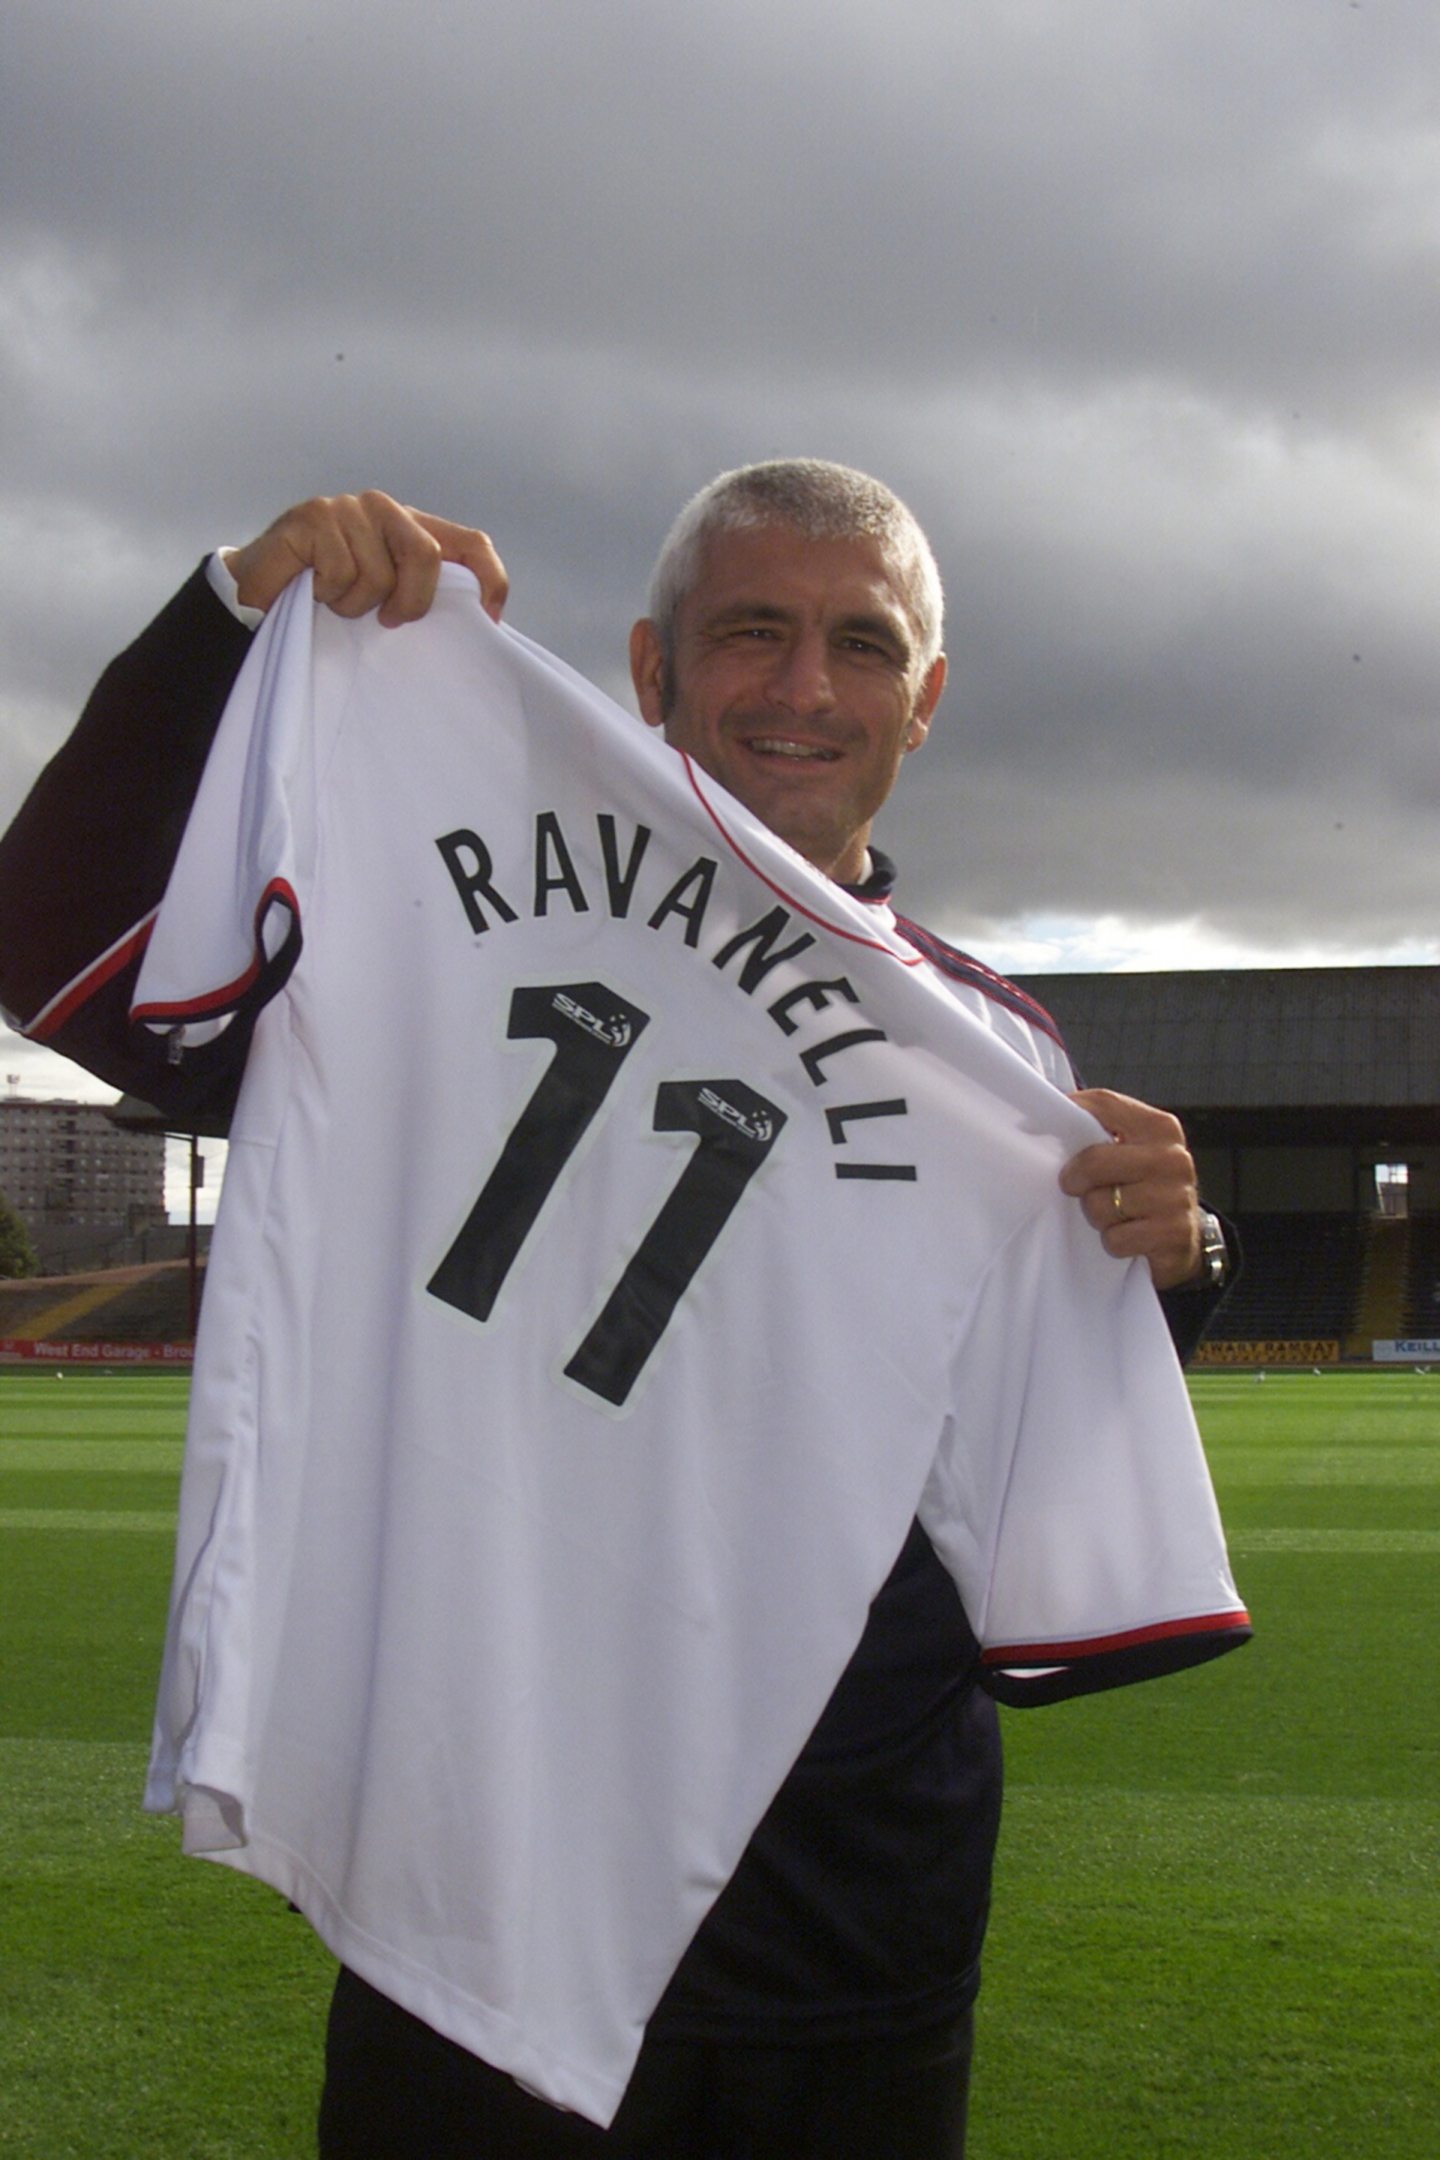 Ravanelli, smiling and holding a Dundee shirt, was the English Premier League top scorer seven years before joining Dundee. Image: DC Thomson.